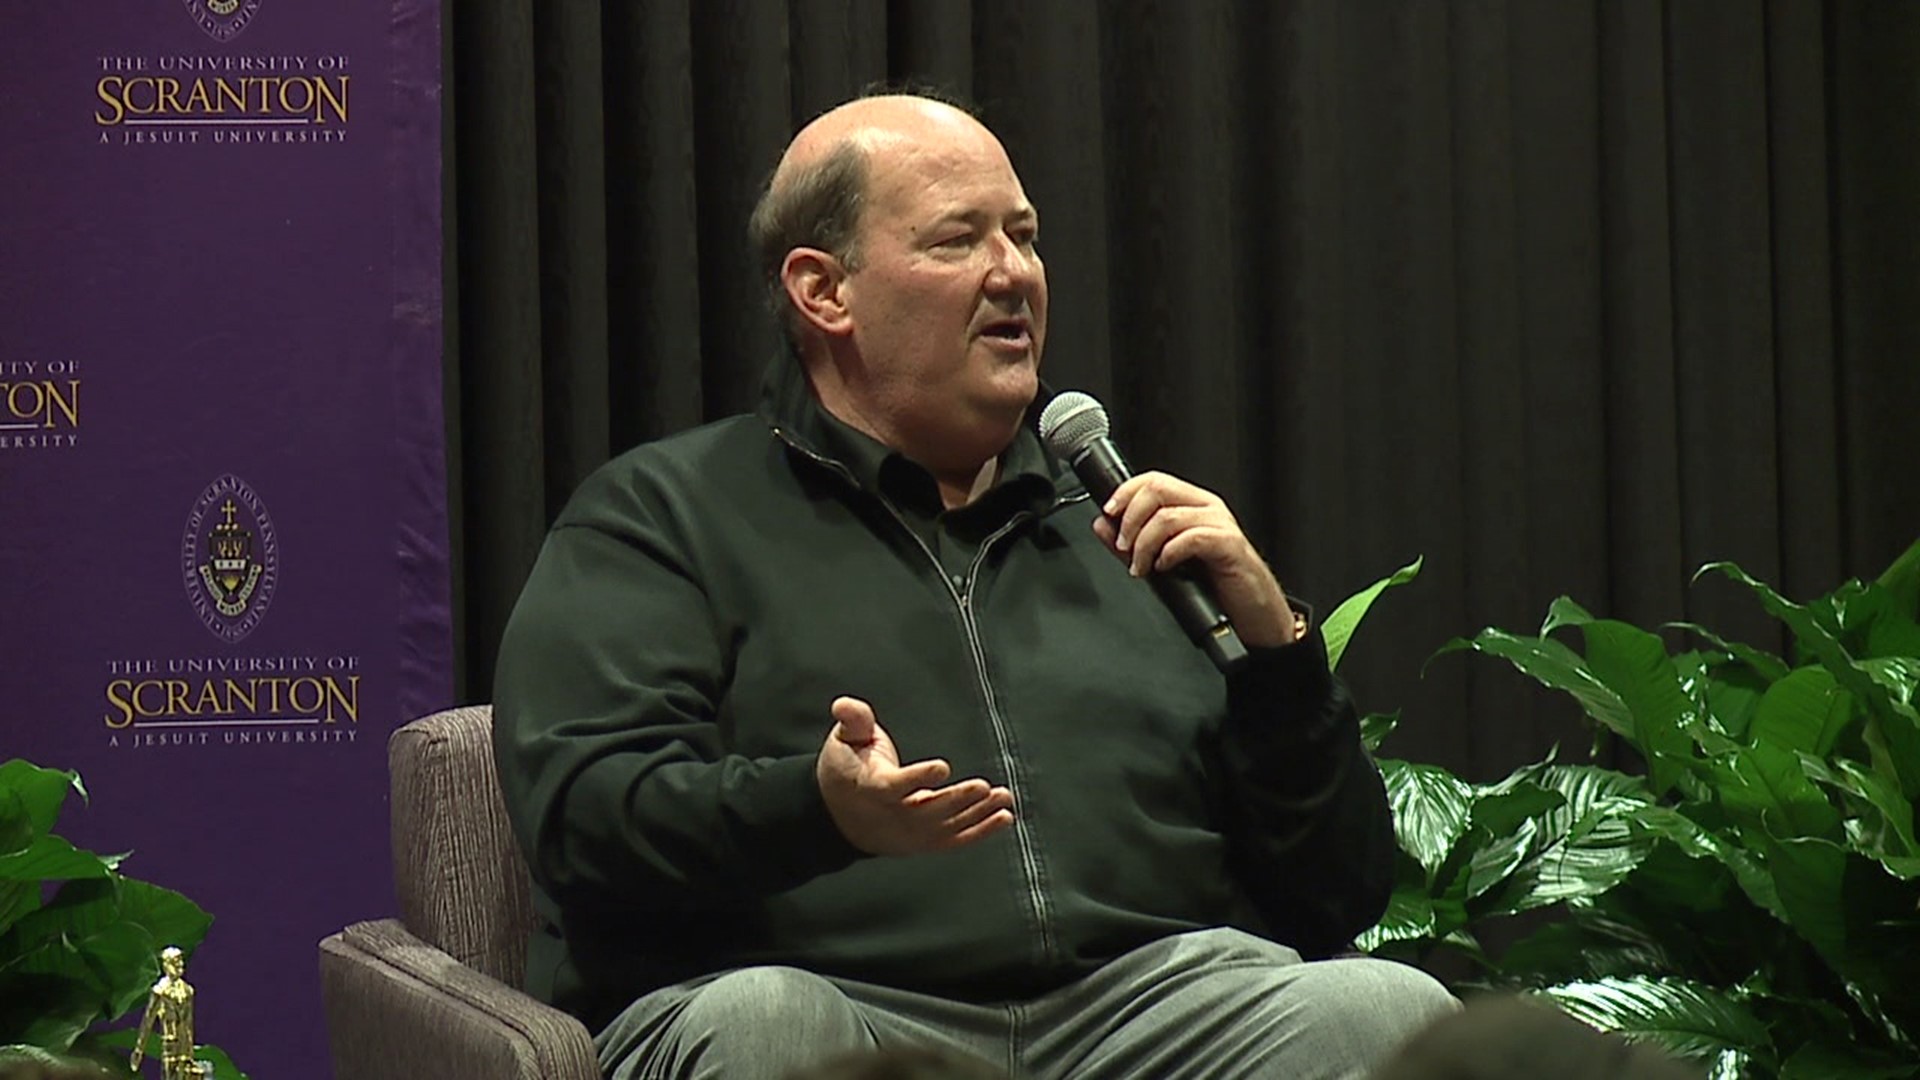 Brian Baumgartner, who played Kevin Malone, was promoting his new cookbook, which features 177 different recipes for chili.